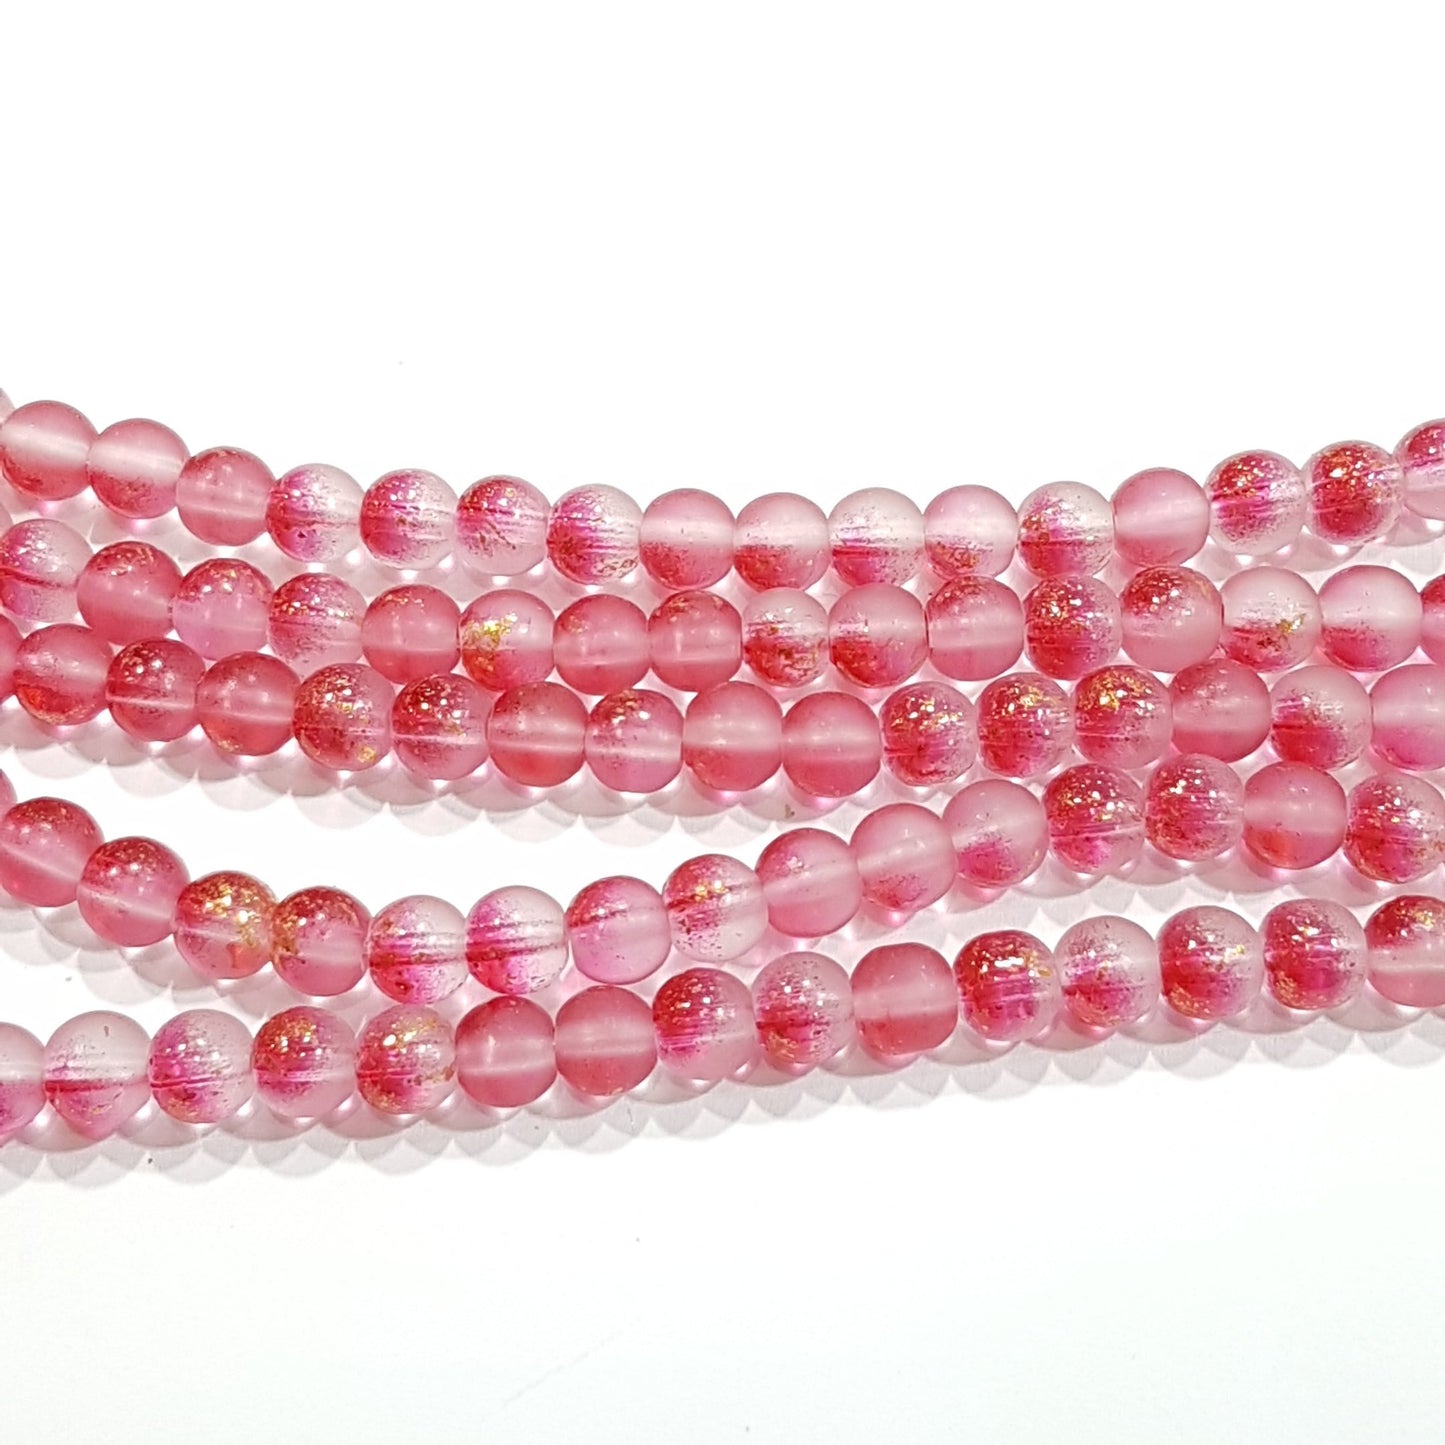 6mm Pink Frosted Glitter Glass Beads